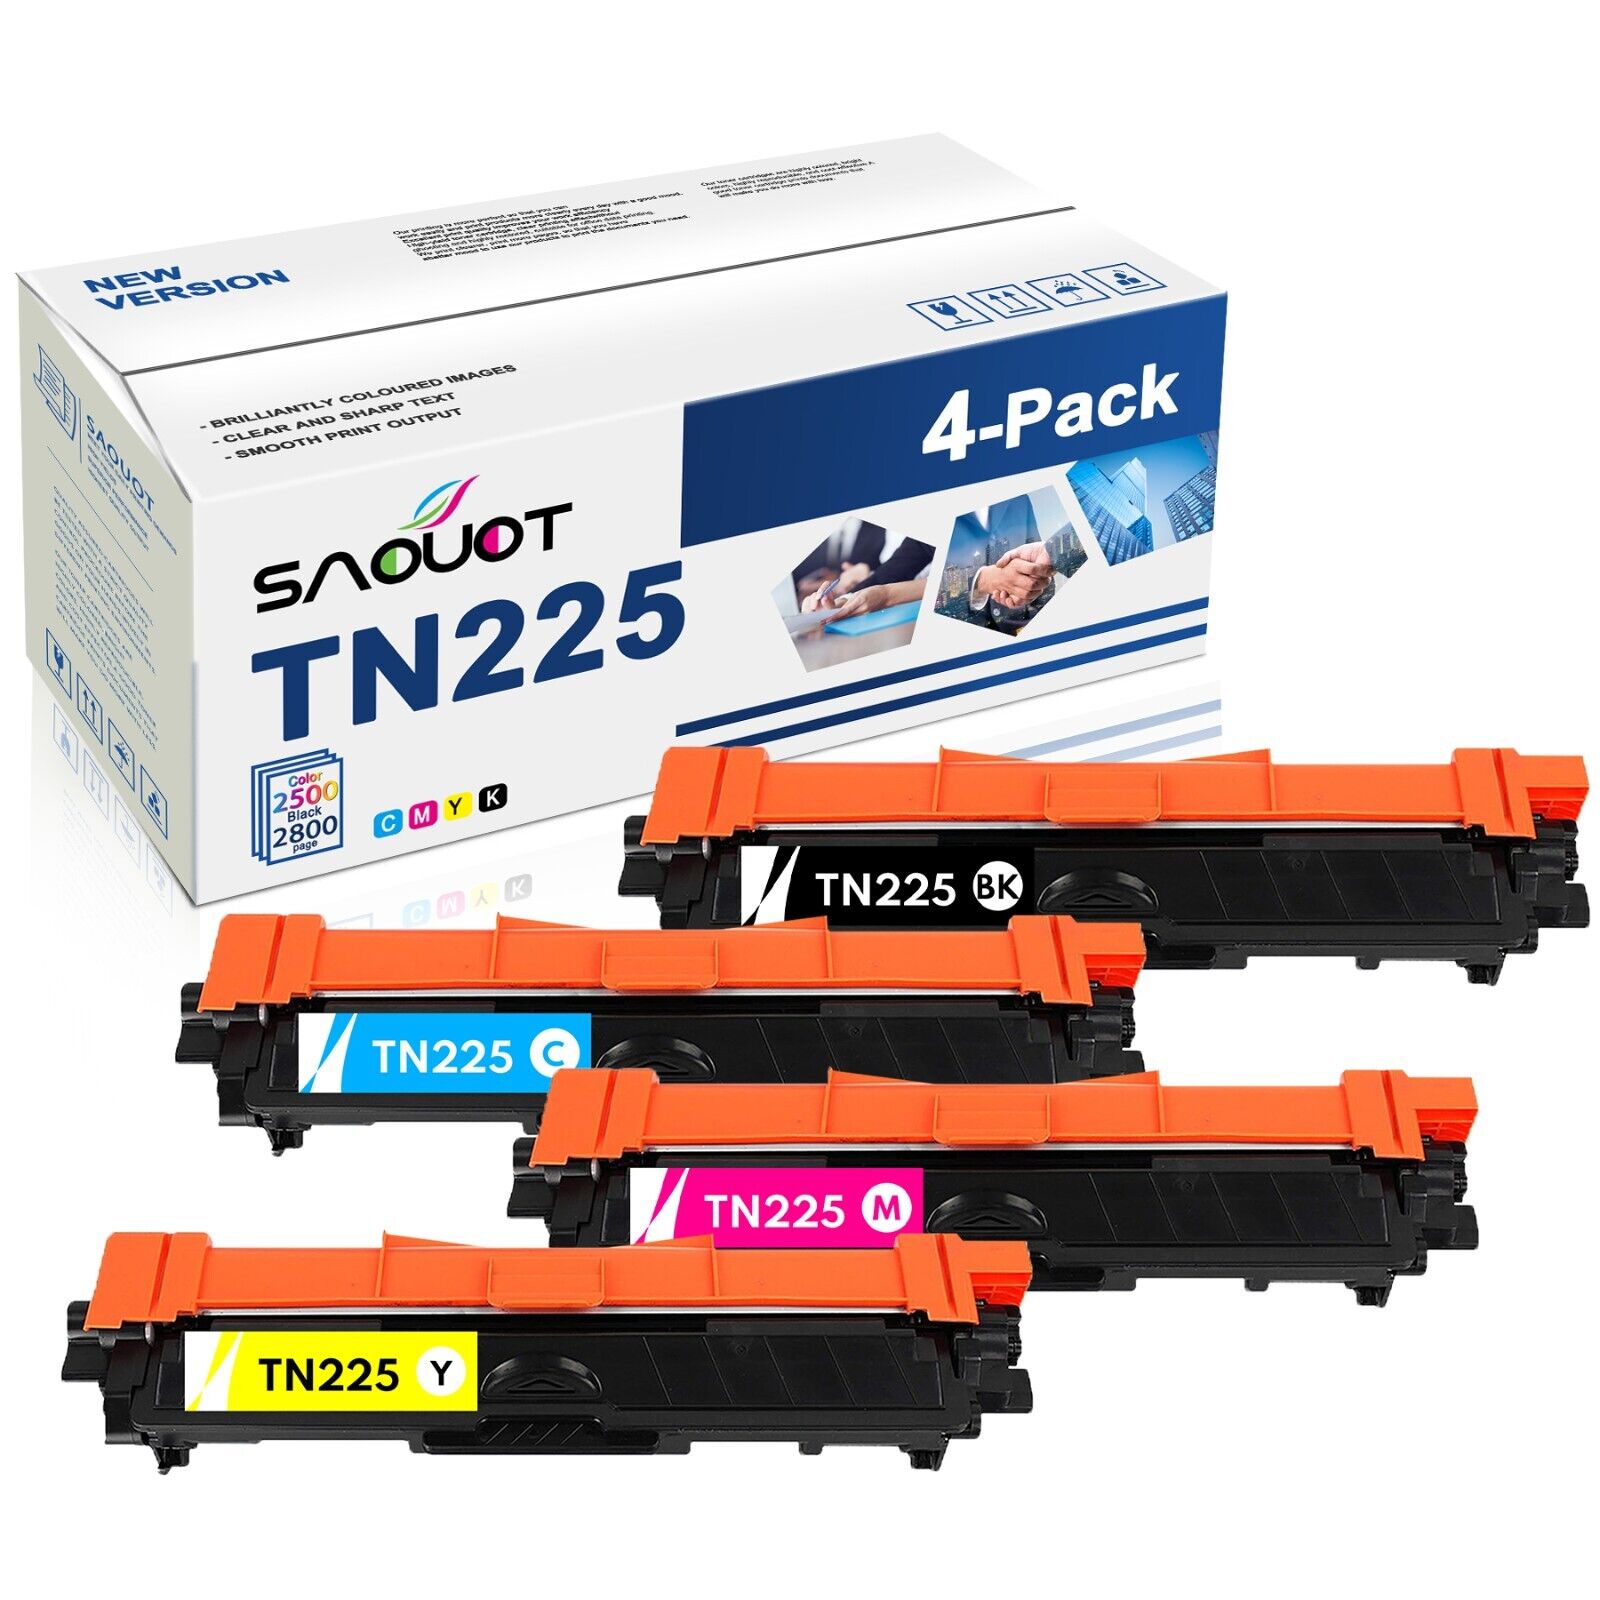 High Quality TN-225 TN225 Toner Cartridge Replacement for Brother HL-3170CDW